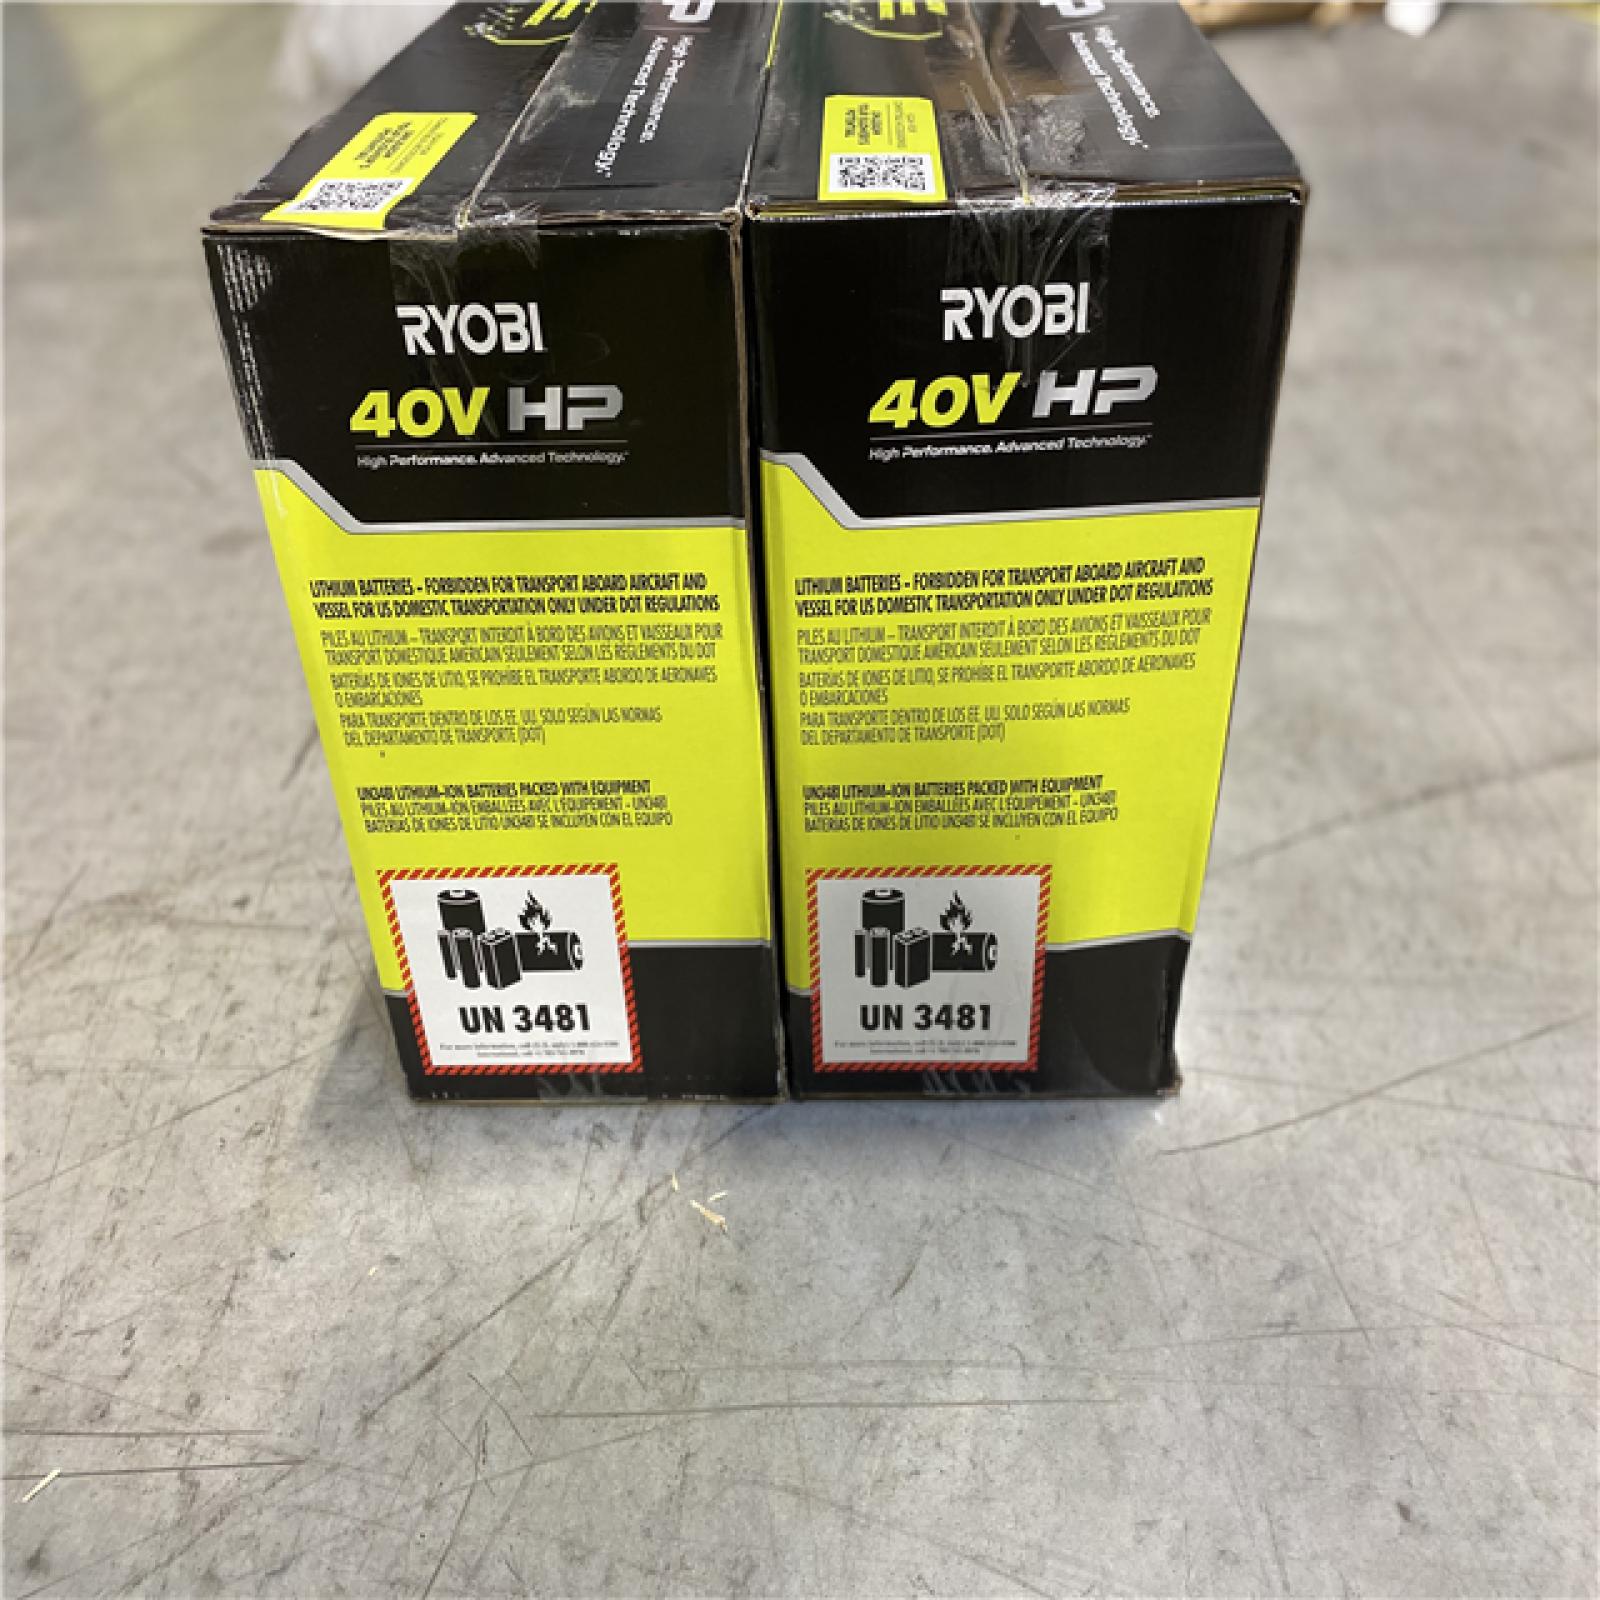 DALLAS LOCATION -RYOBI 40V HP Brushless Whisper Series 190 MPH 730 CFM Cordless Battery Jet Fan Leaf Blower with (2) 4.0 Ah Batteries & Charger ( 2 UNITS)